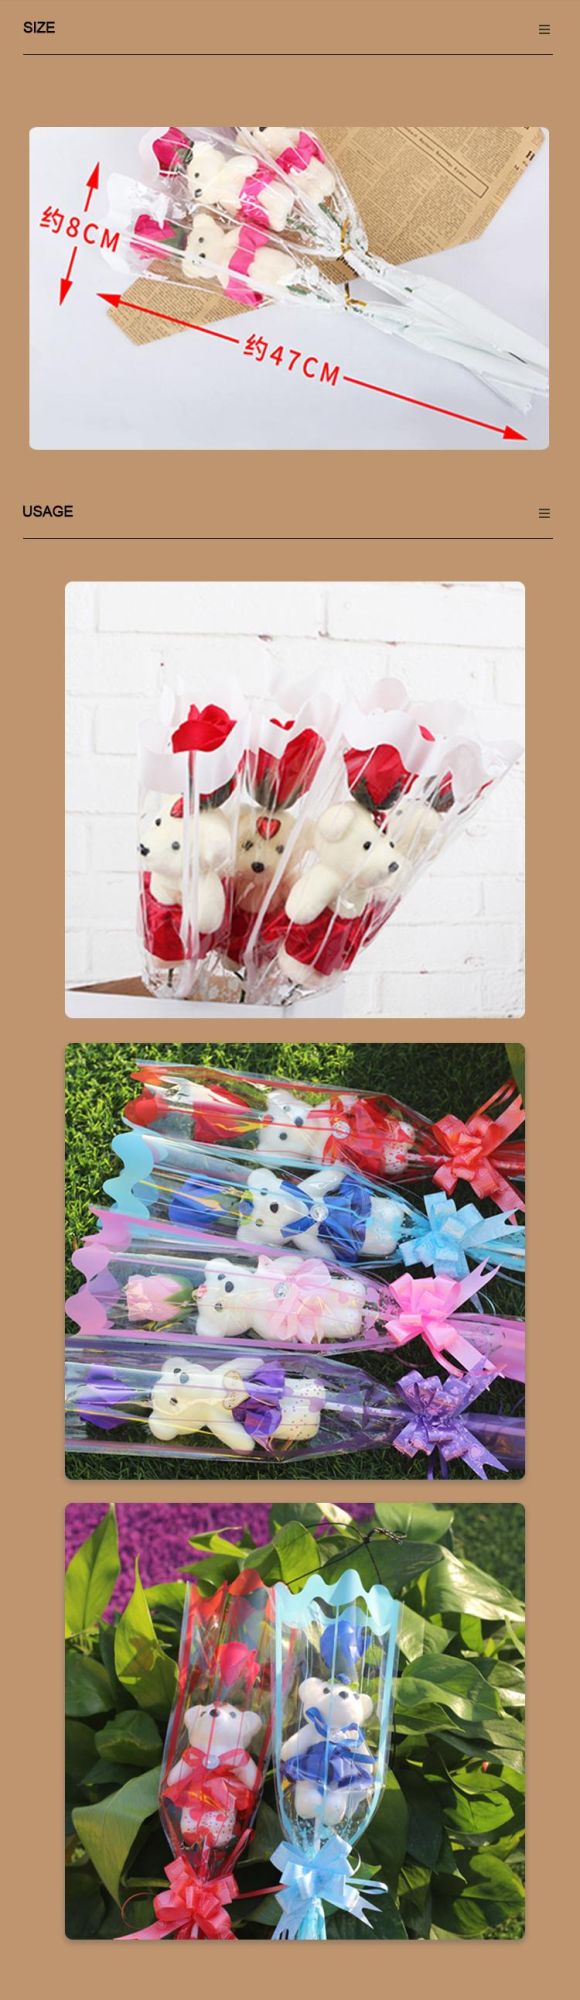 Factory Hotsale Flower Gifts Soap Rose Bouquet with Teddy Bear for Girl Friends